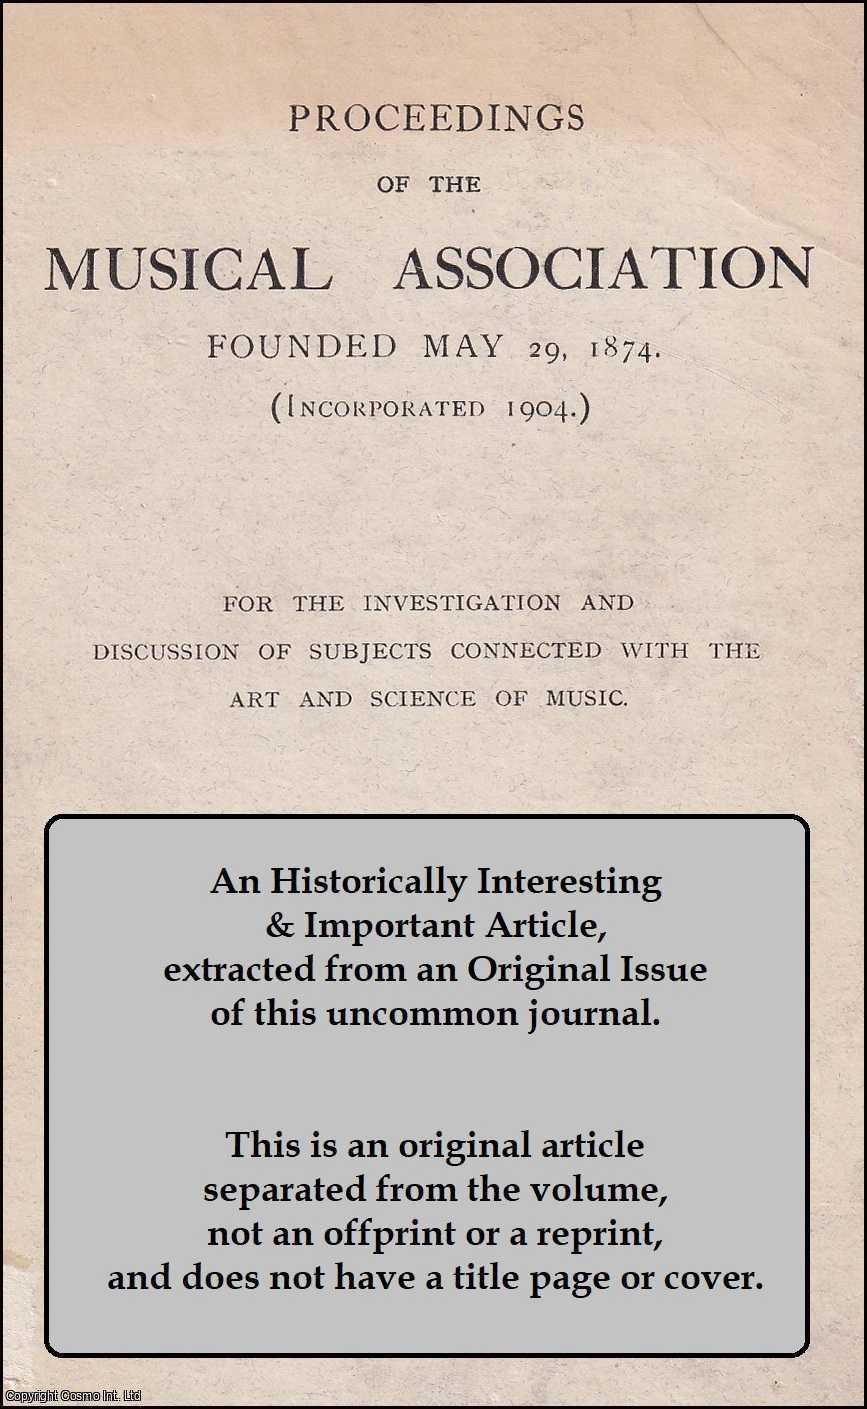 J. A. Westrup - The Originality of Monteverde. An original article from The Proceedings of The Musical Association, 1934.